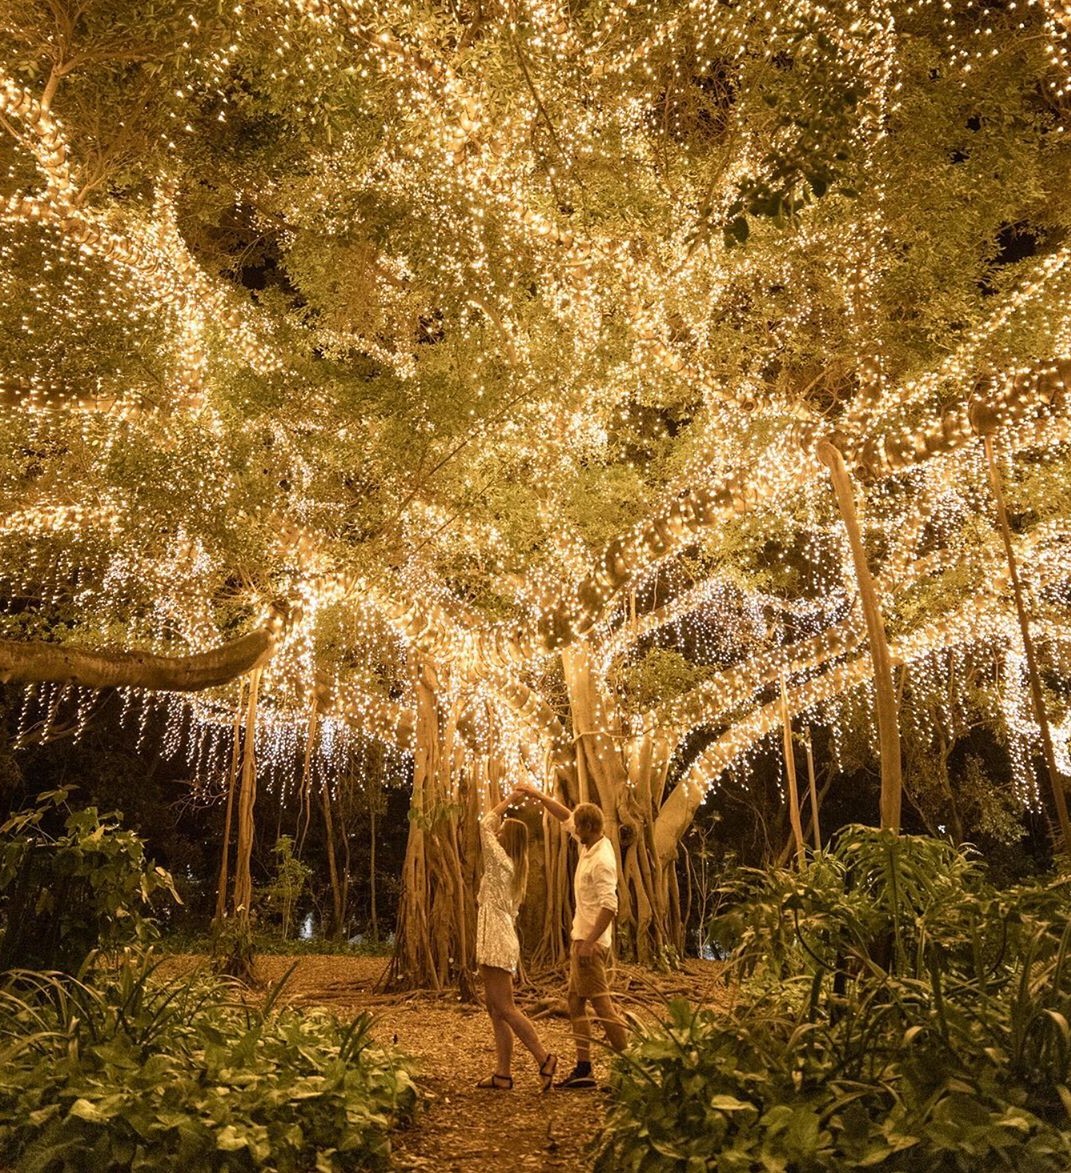 Frolick under the fairy light trees at the end of the Goodwill Bridge in Gardens Point ✨ I think it's pretty clear that this is one of the most Instagrammable and magical places in Brisbane. 📷 thisis_barbandpete #thisisbrisbane